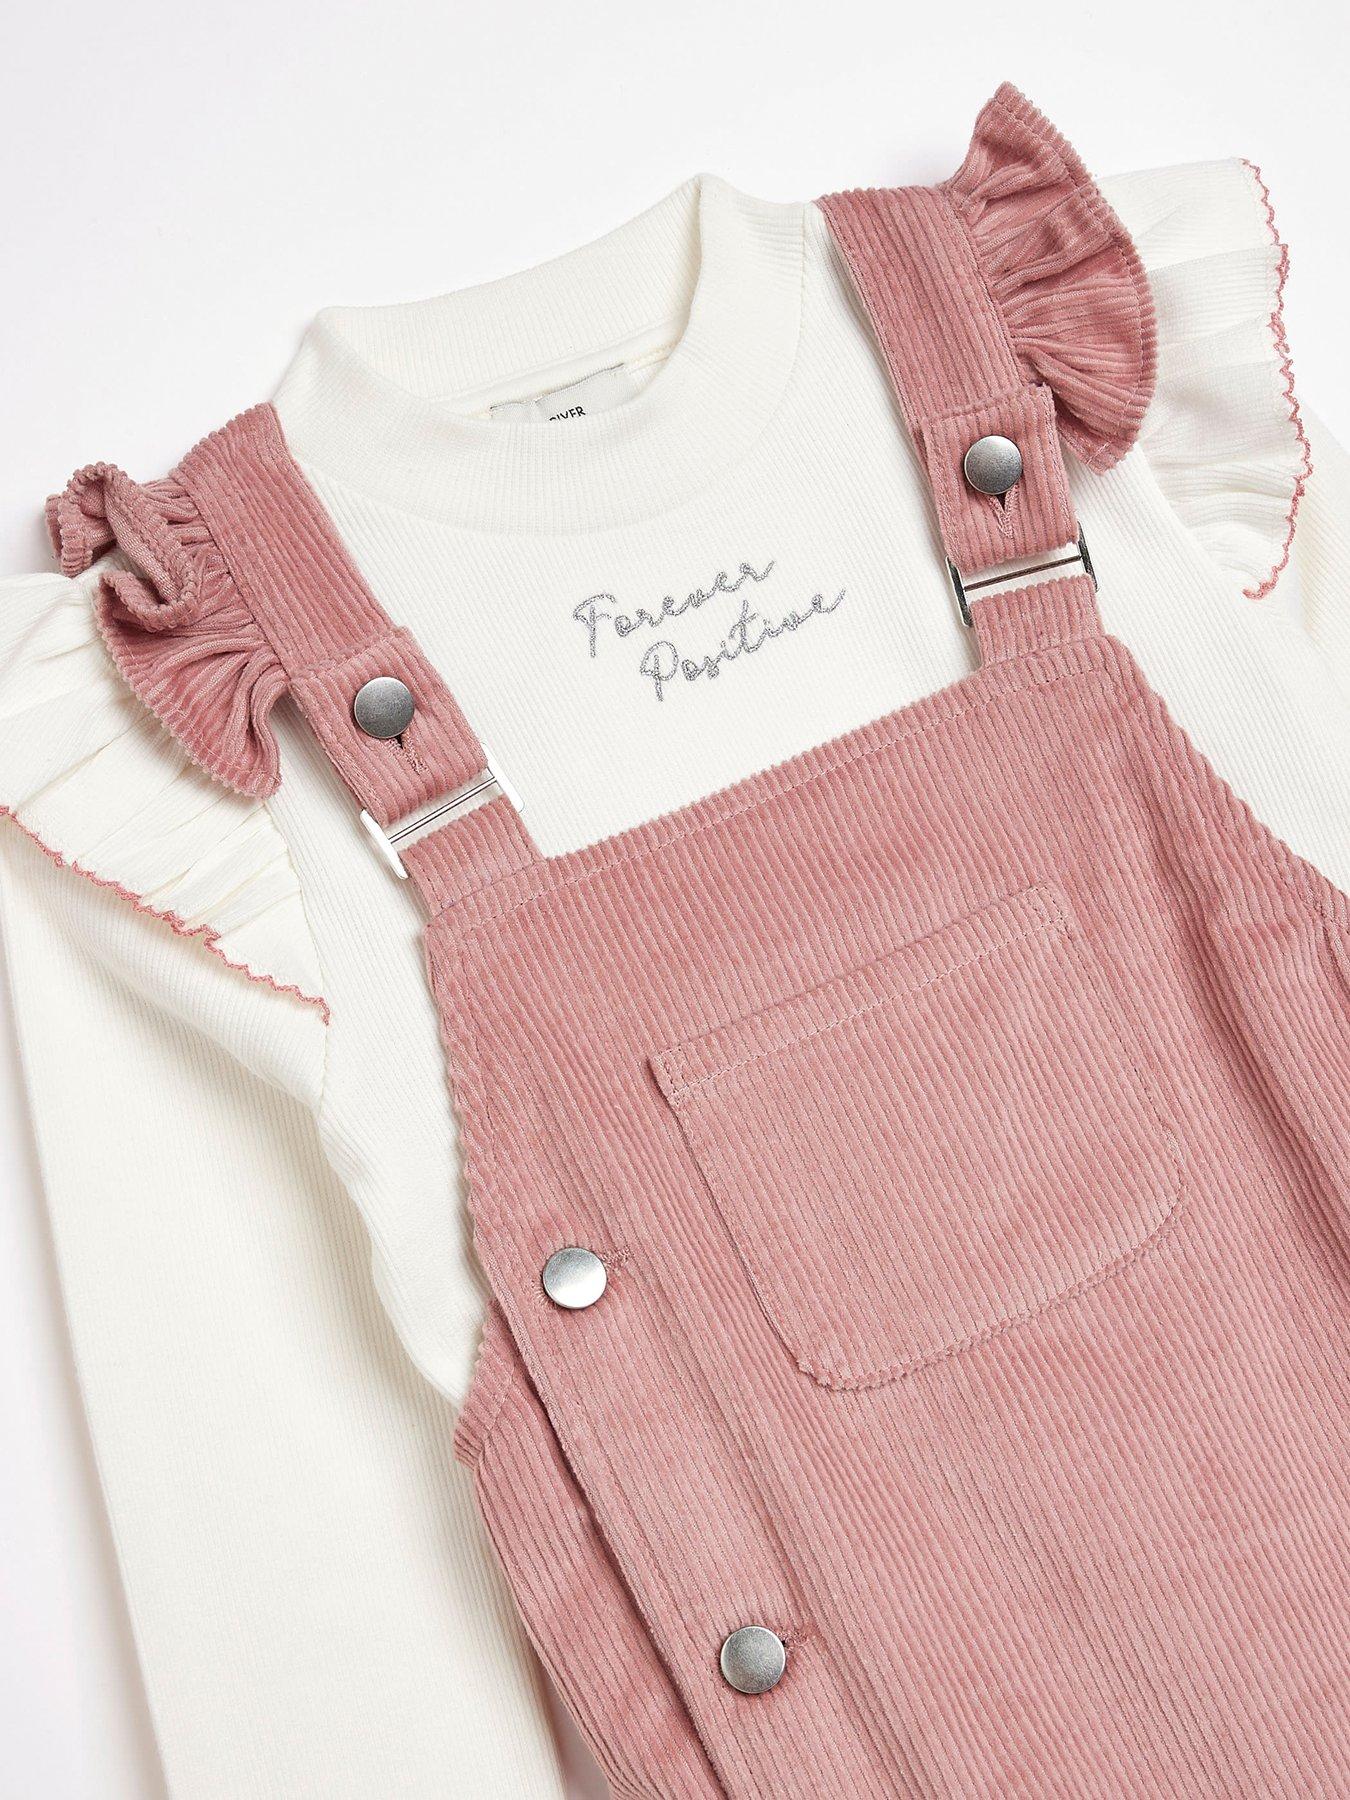 River Island Girls Corduroy Dress Outfit - Pink 